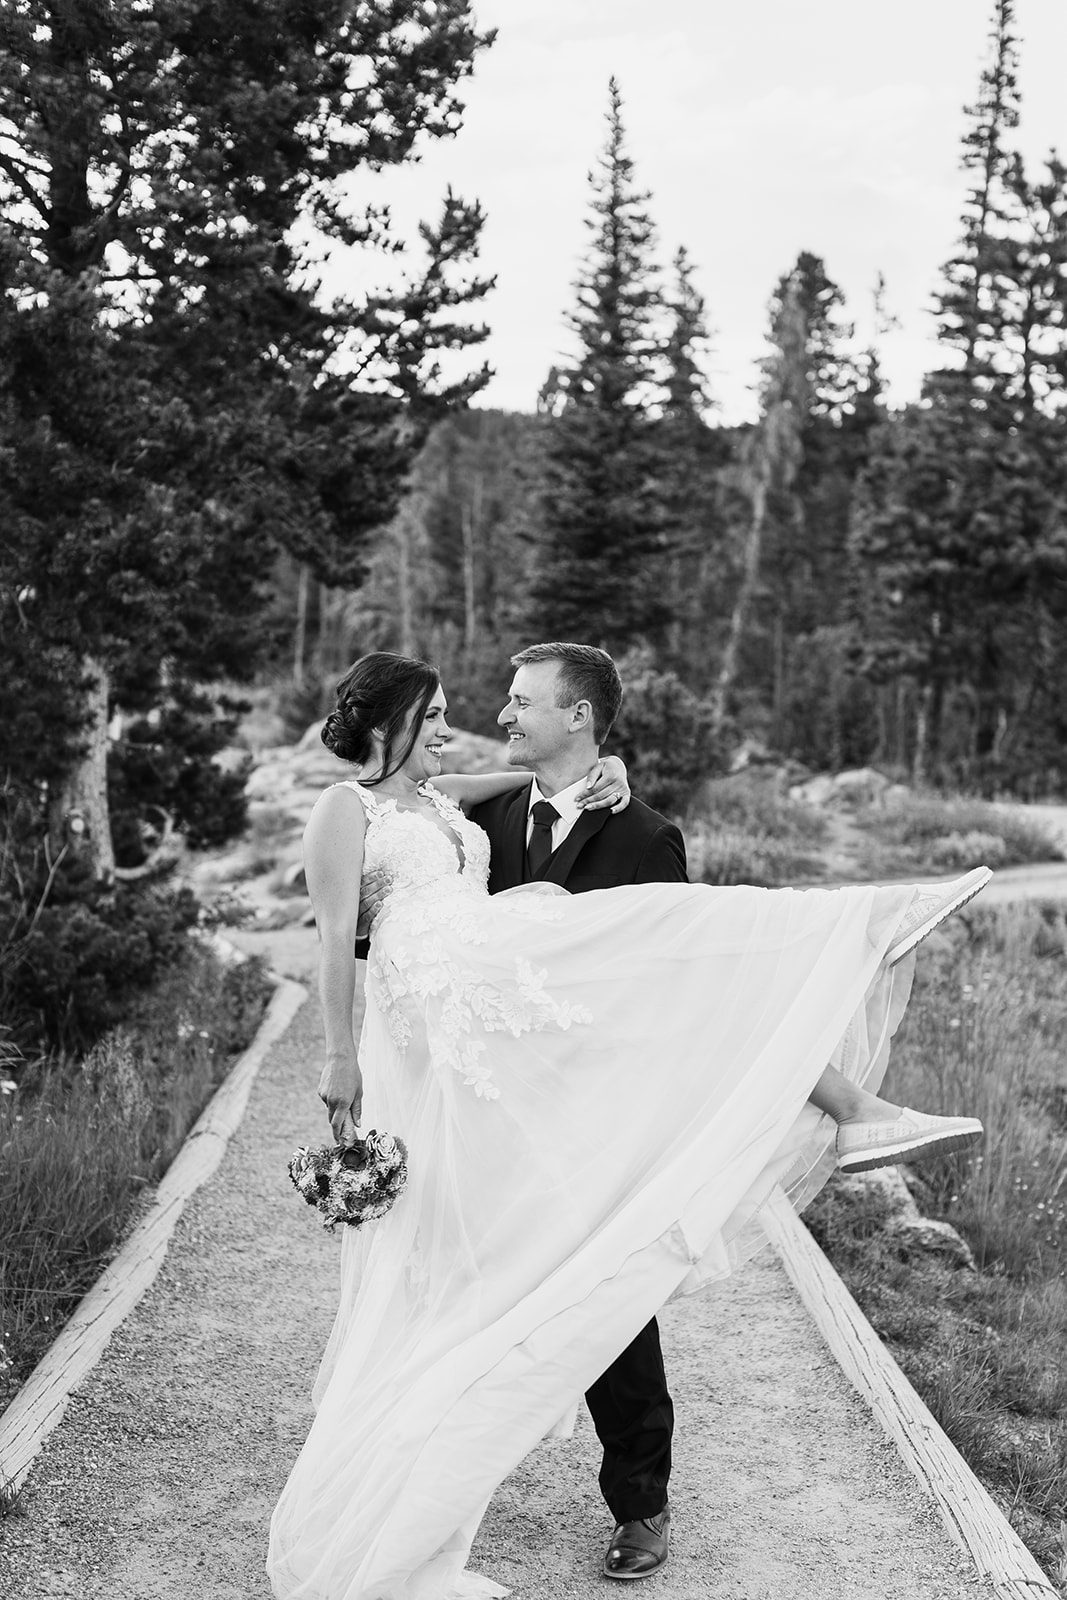 Groom holding his bride, black and white photo, after their Sprague Lake elopement ceremony